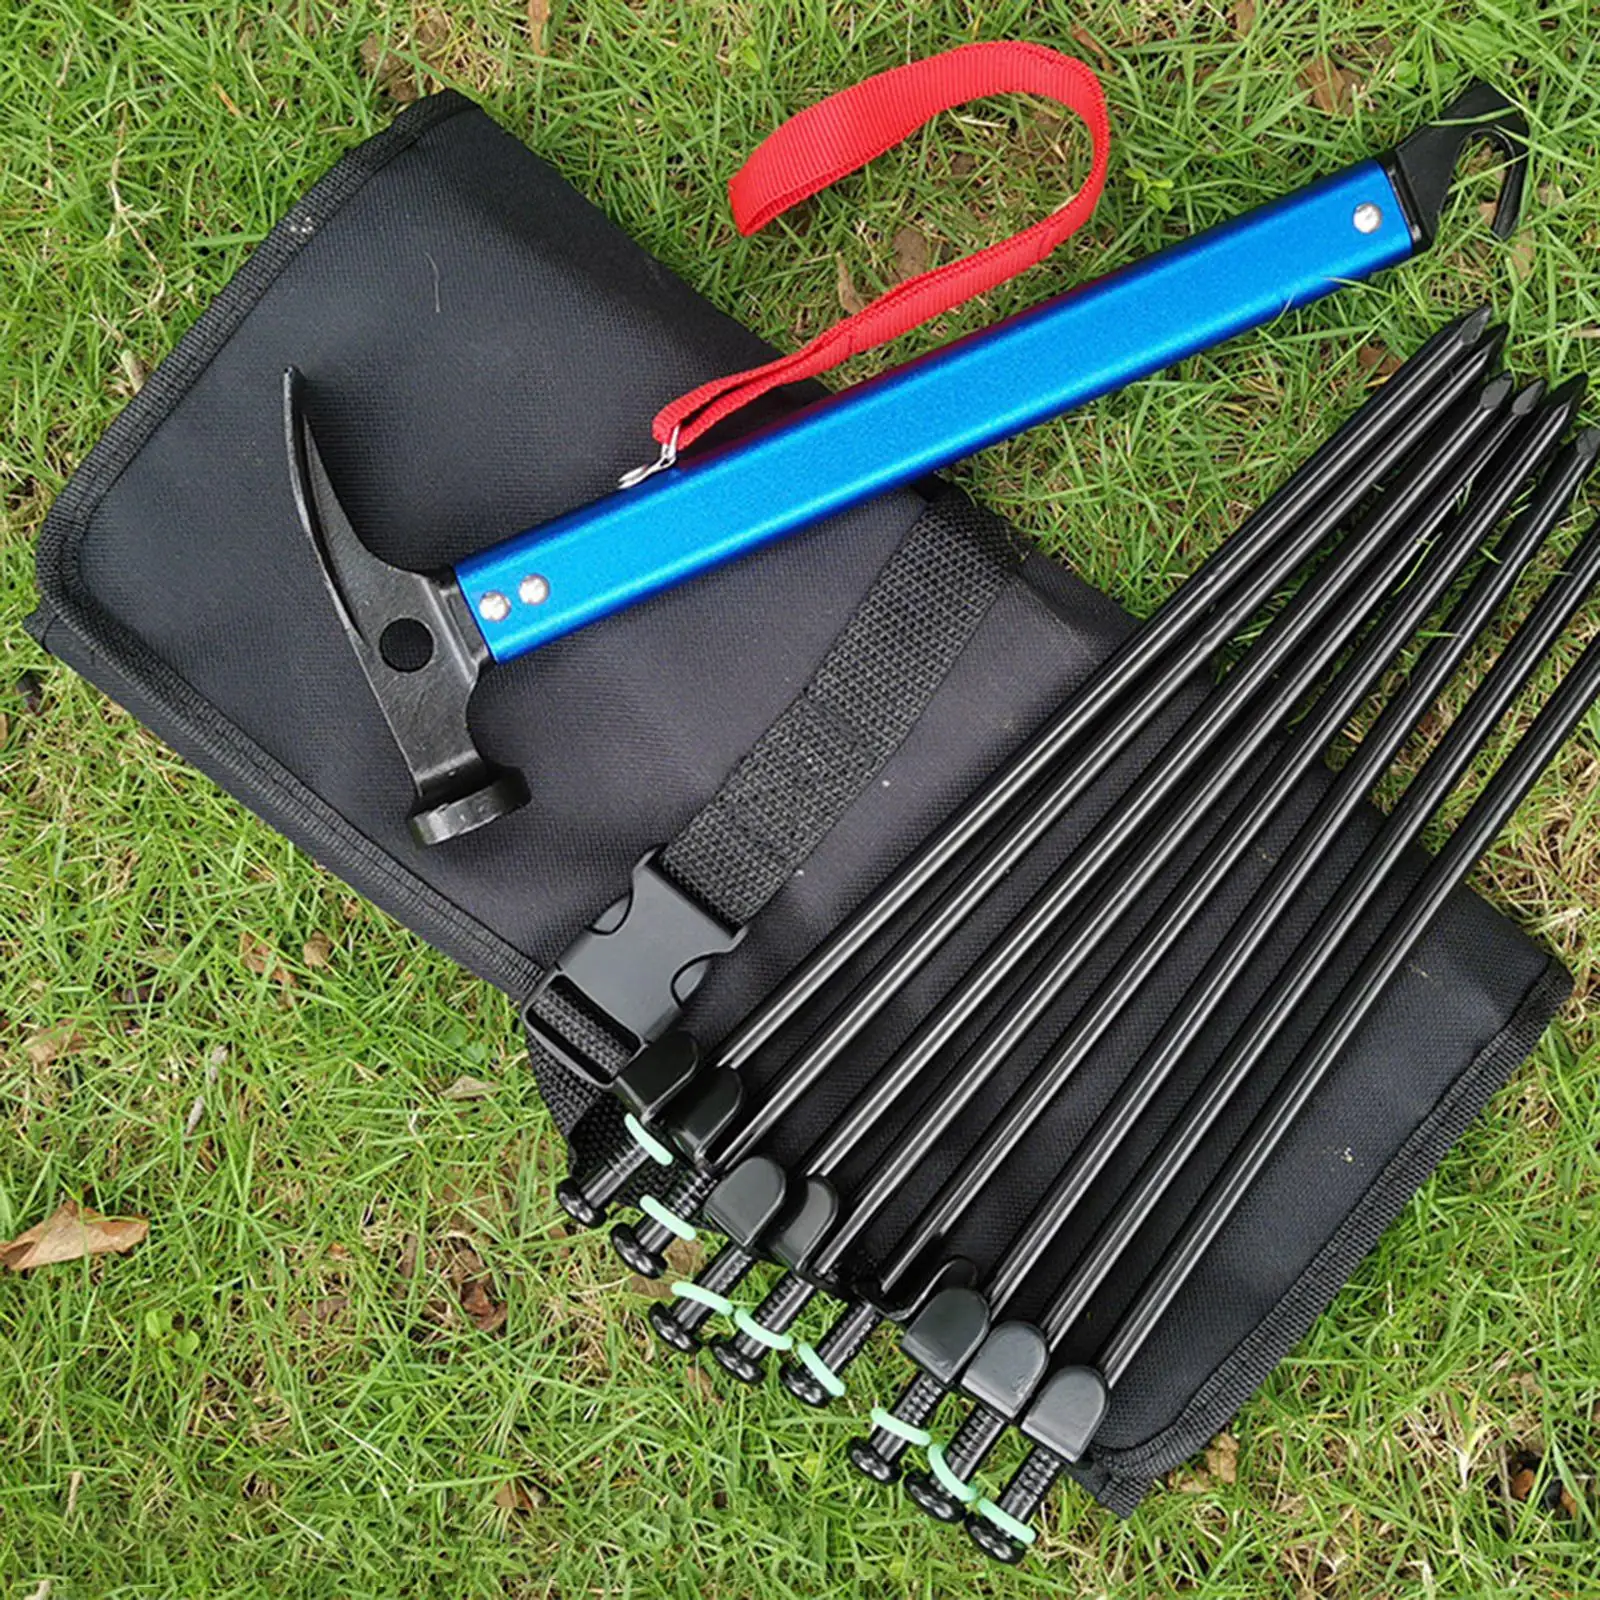 Roll up Bag Organizer Holder Portable Hiking Camping Tent Stakes Storage Bag